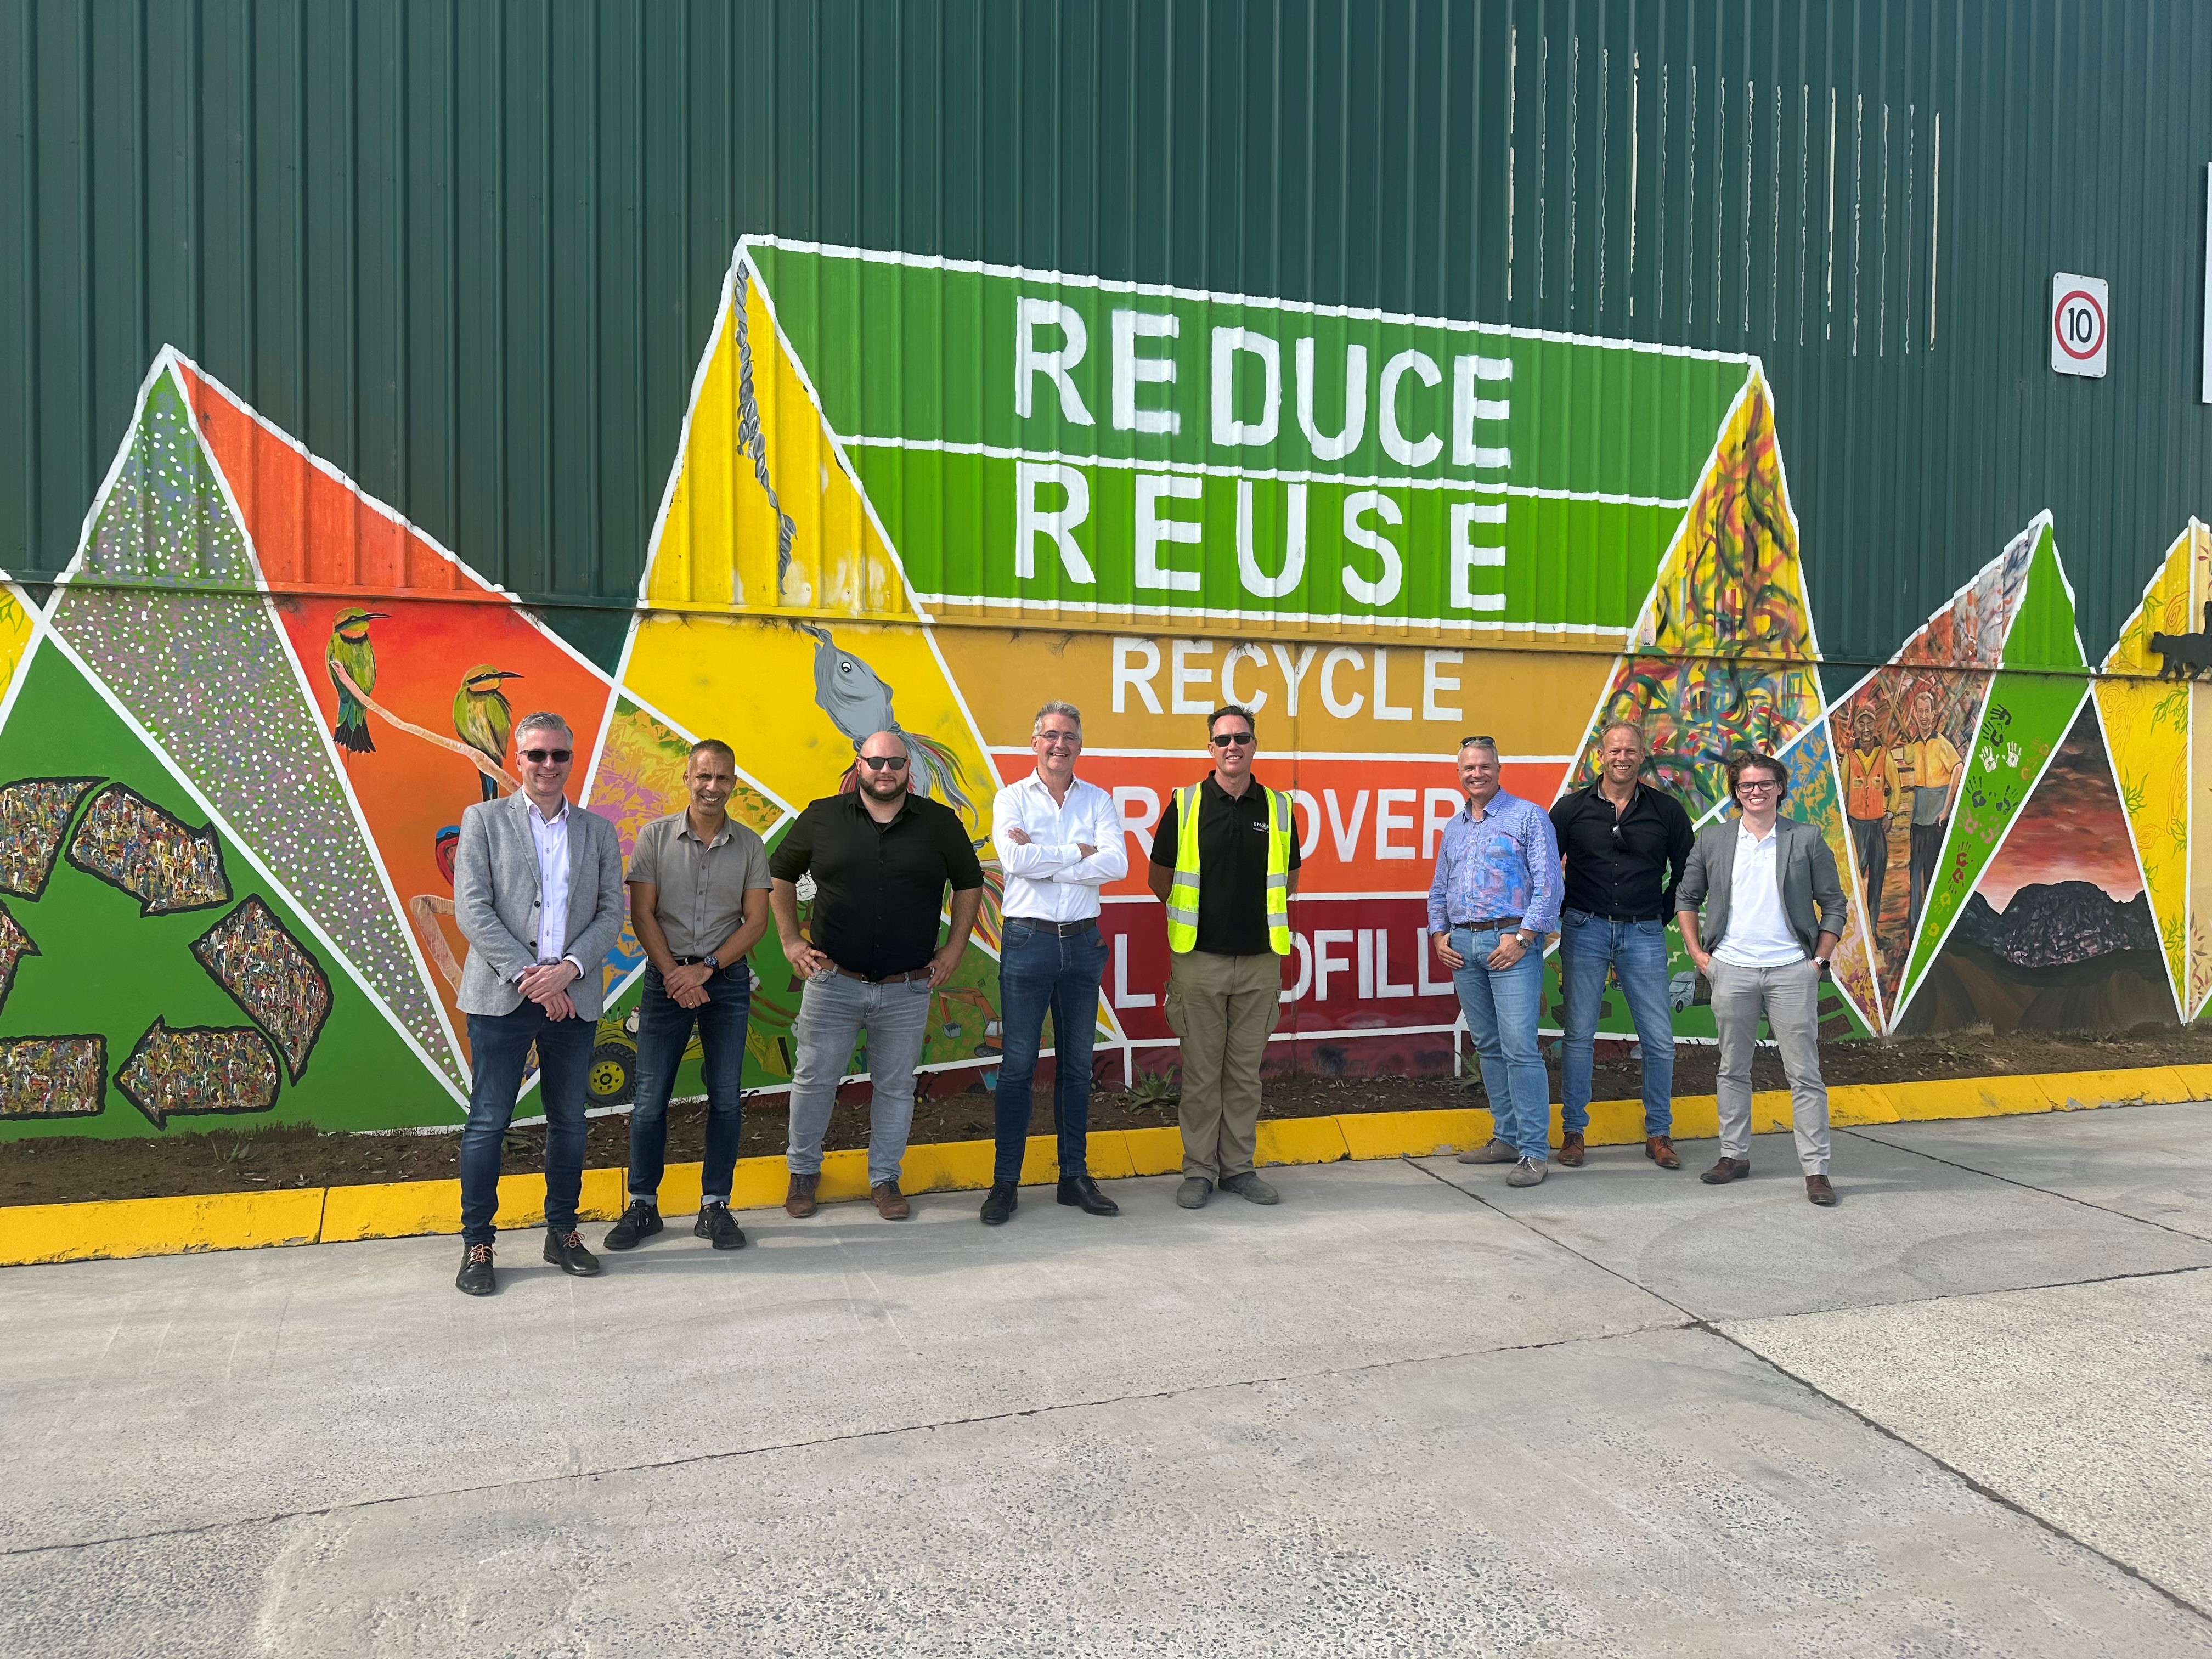 PIB Cluster on Waste and Circularity in front of mural reading "reduce, reuse, recycle"